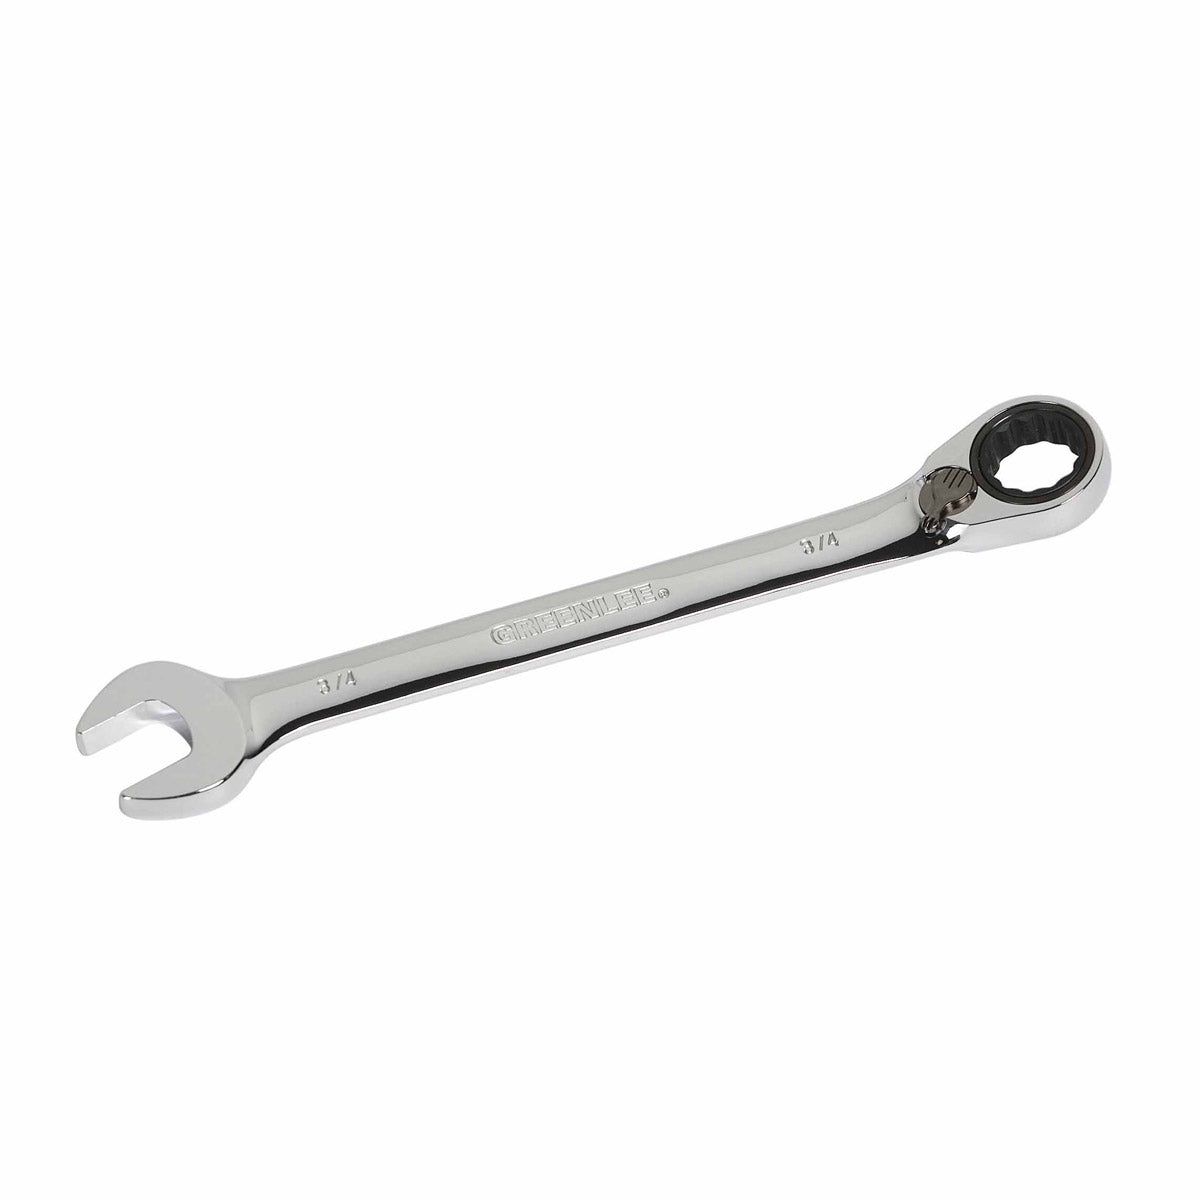 Greenlee 0354-19 WRENCH,COMBO RATCHET 3/4"